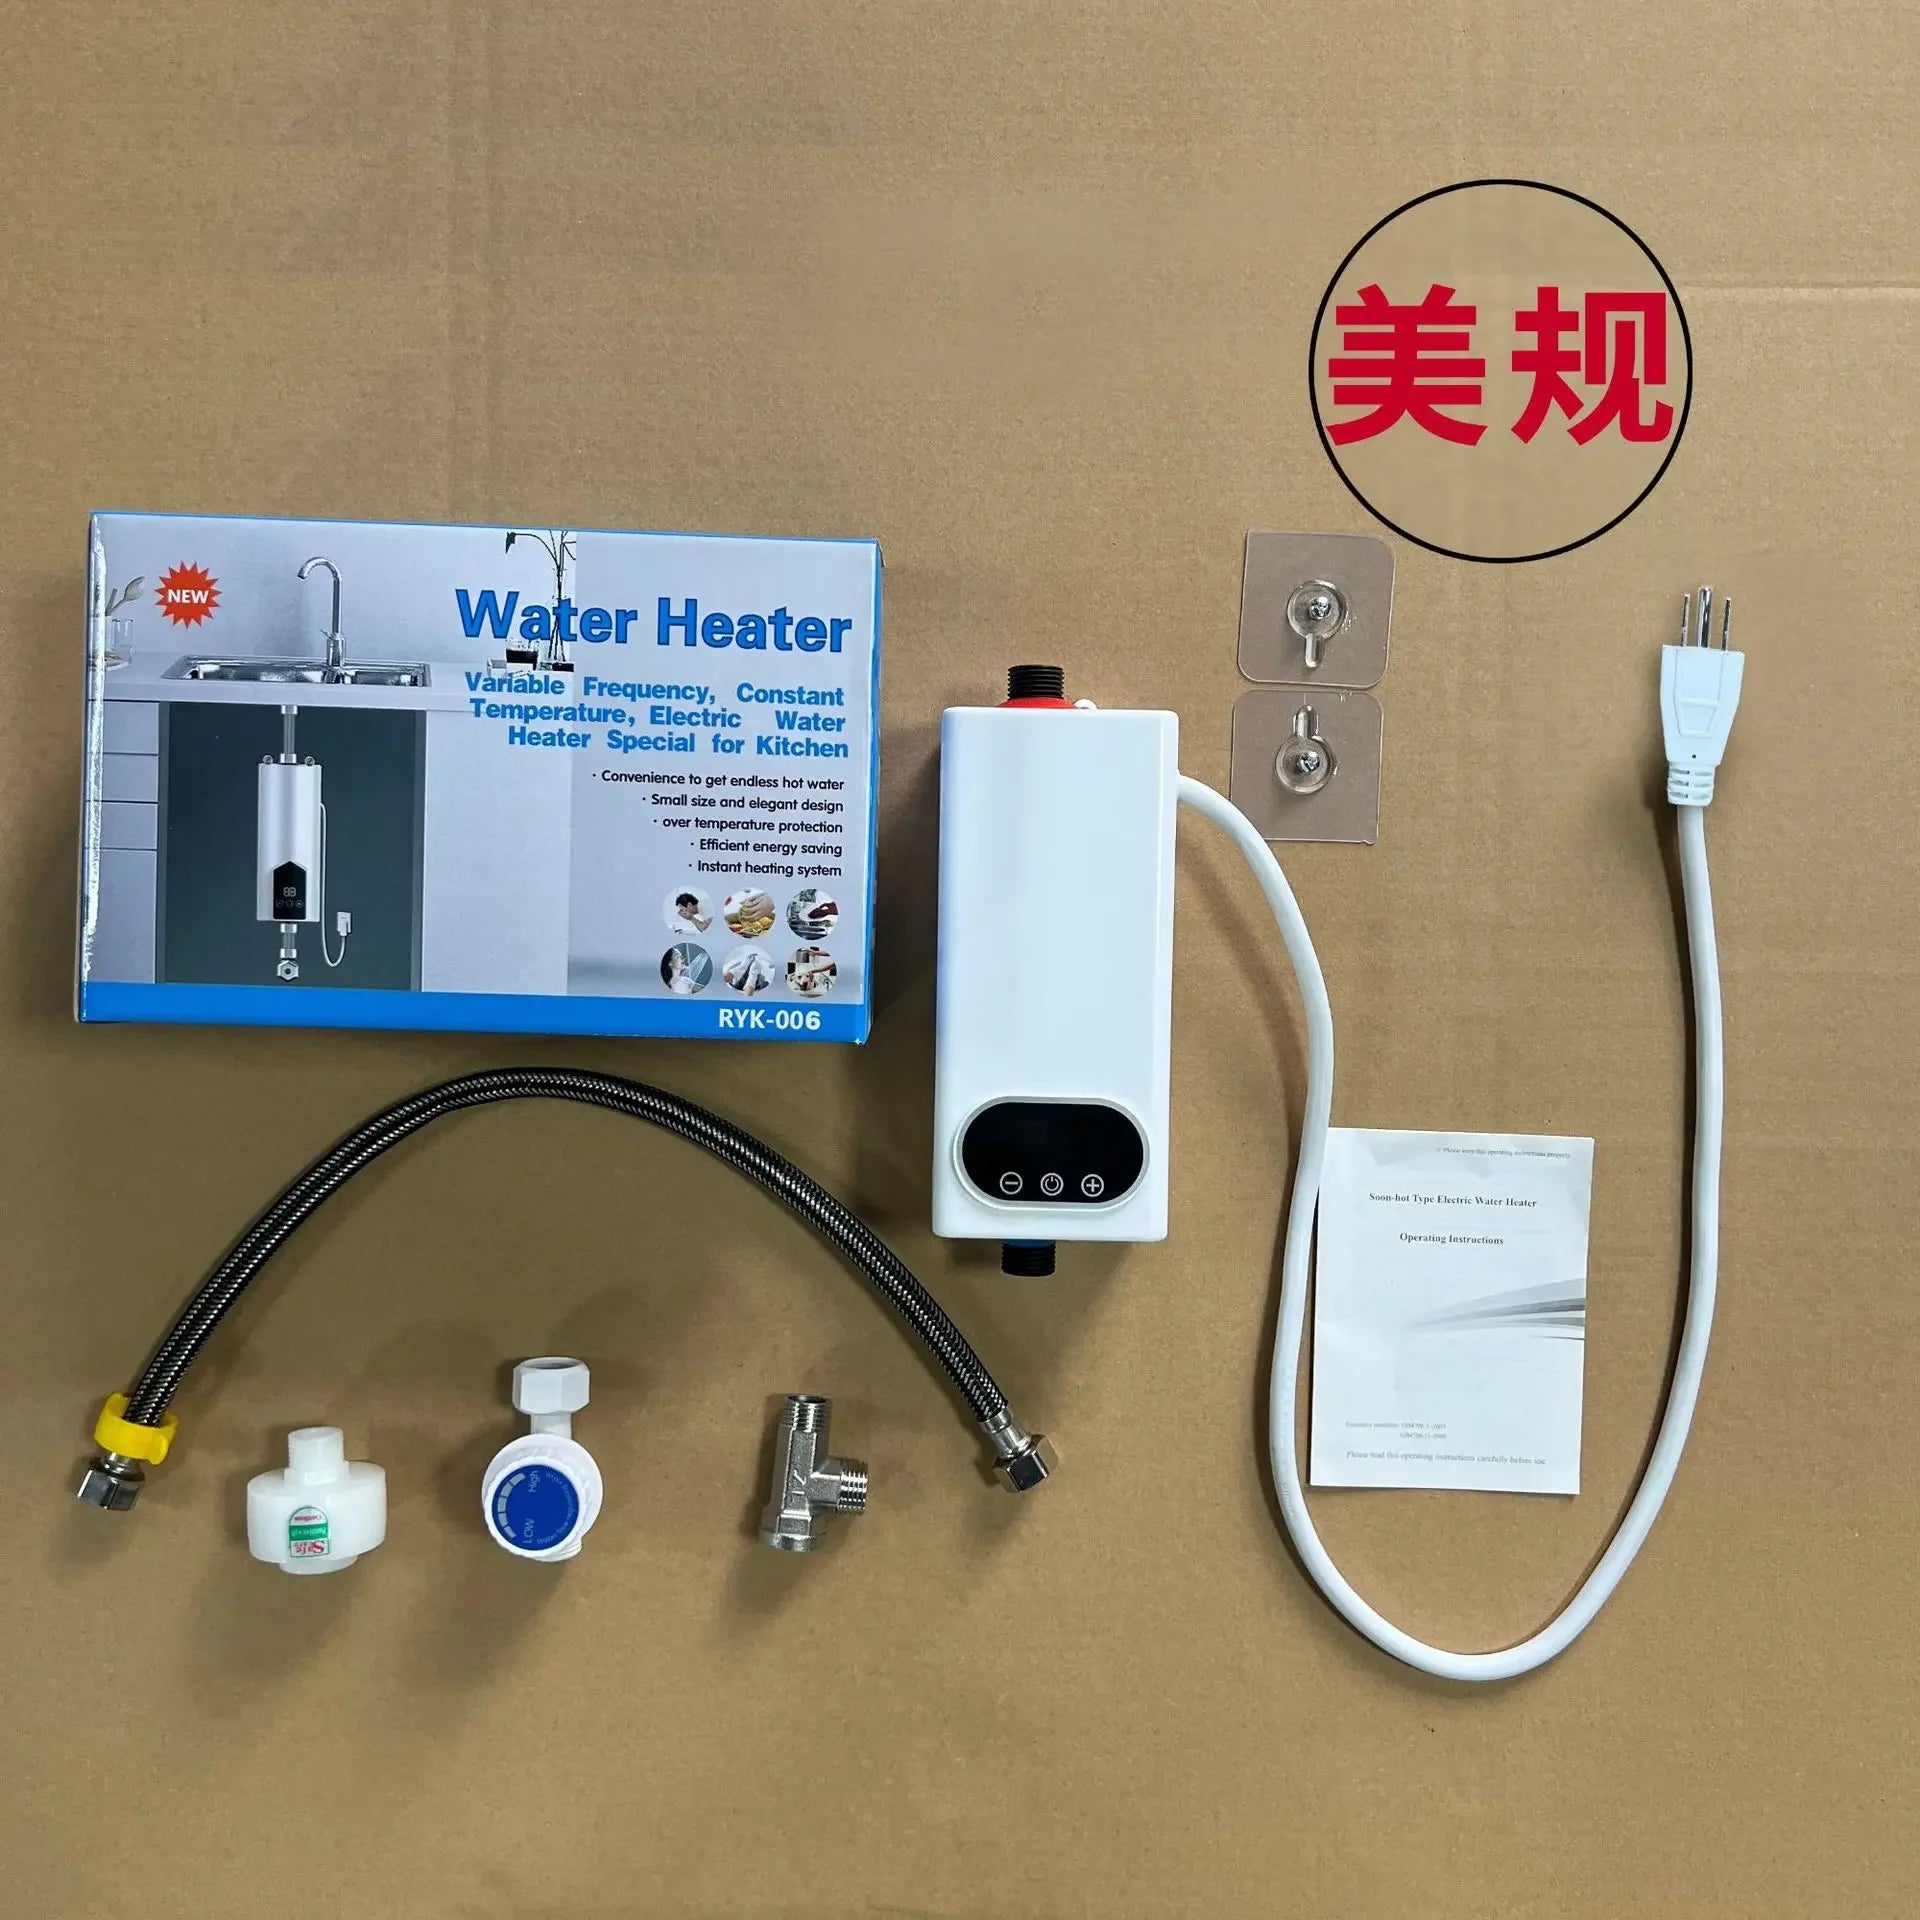 5.5kW Instant Electric Tankless Water Heater , Smart Water Heater Self-Modulating No Standby Losses, Household Shower Hot Water